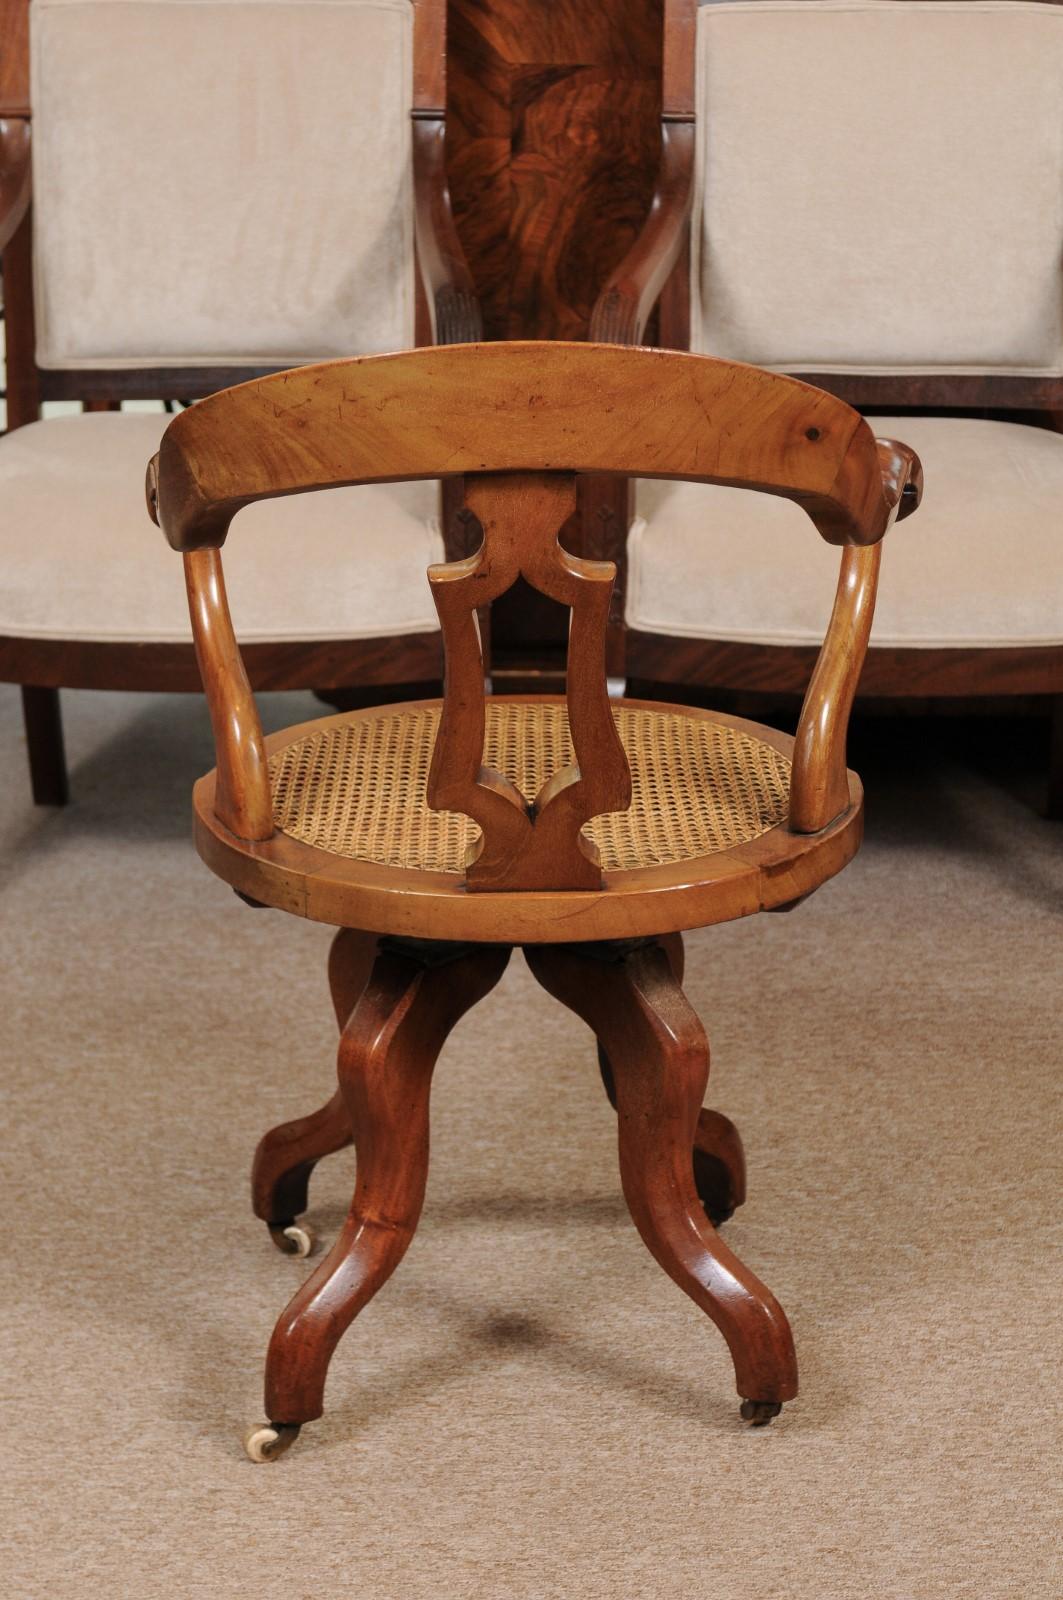 Victorian Walnut Desk Chair with Swivel Caned Seat, England, Late 19th Century For Sale 3